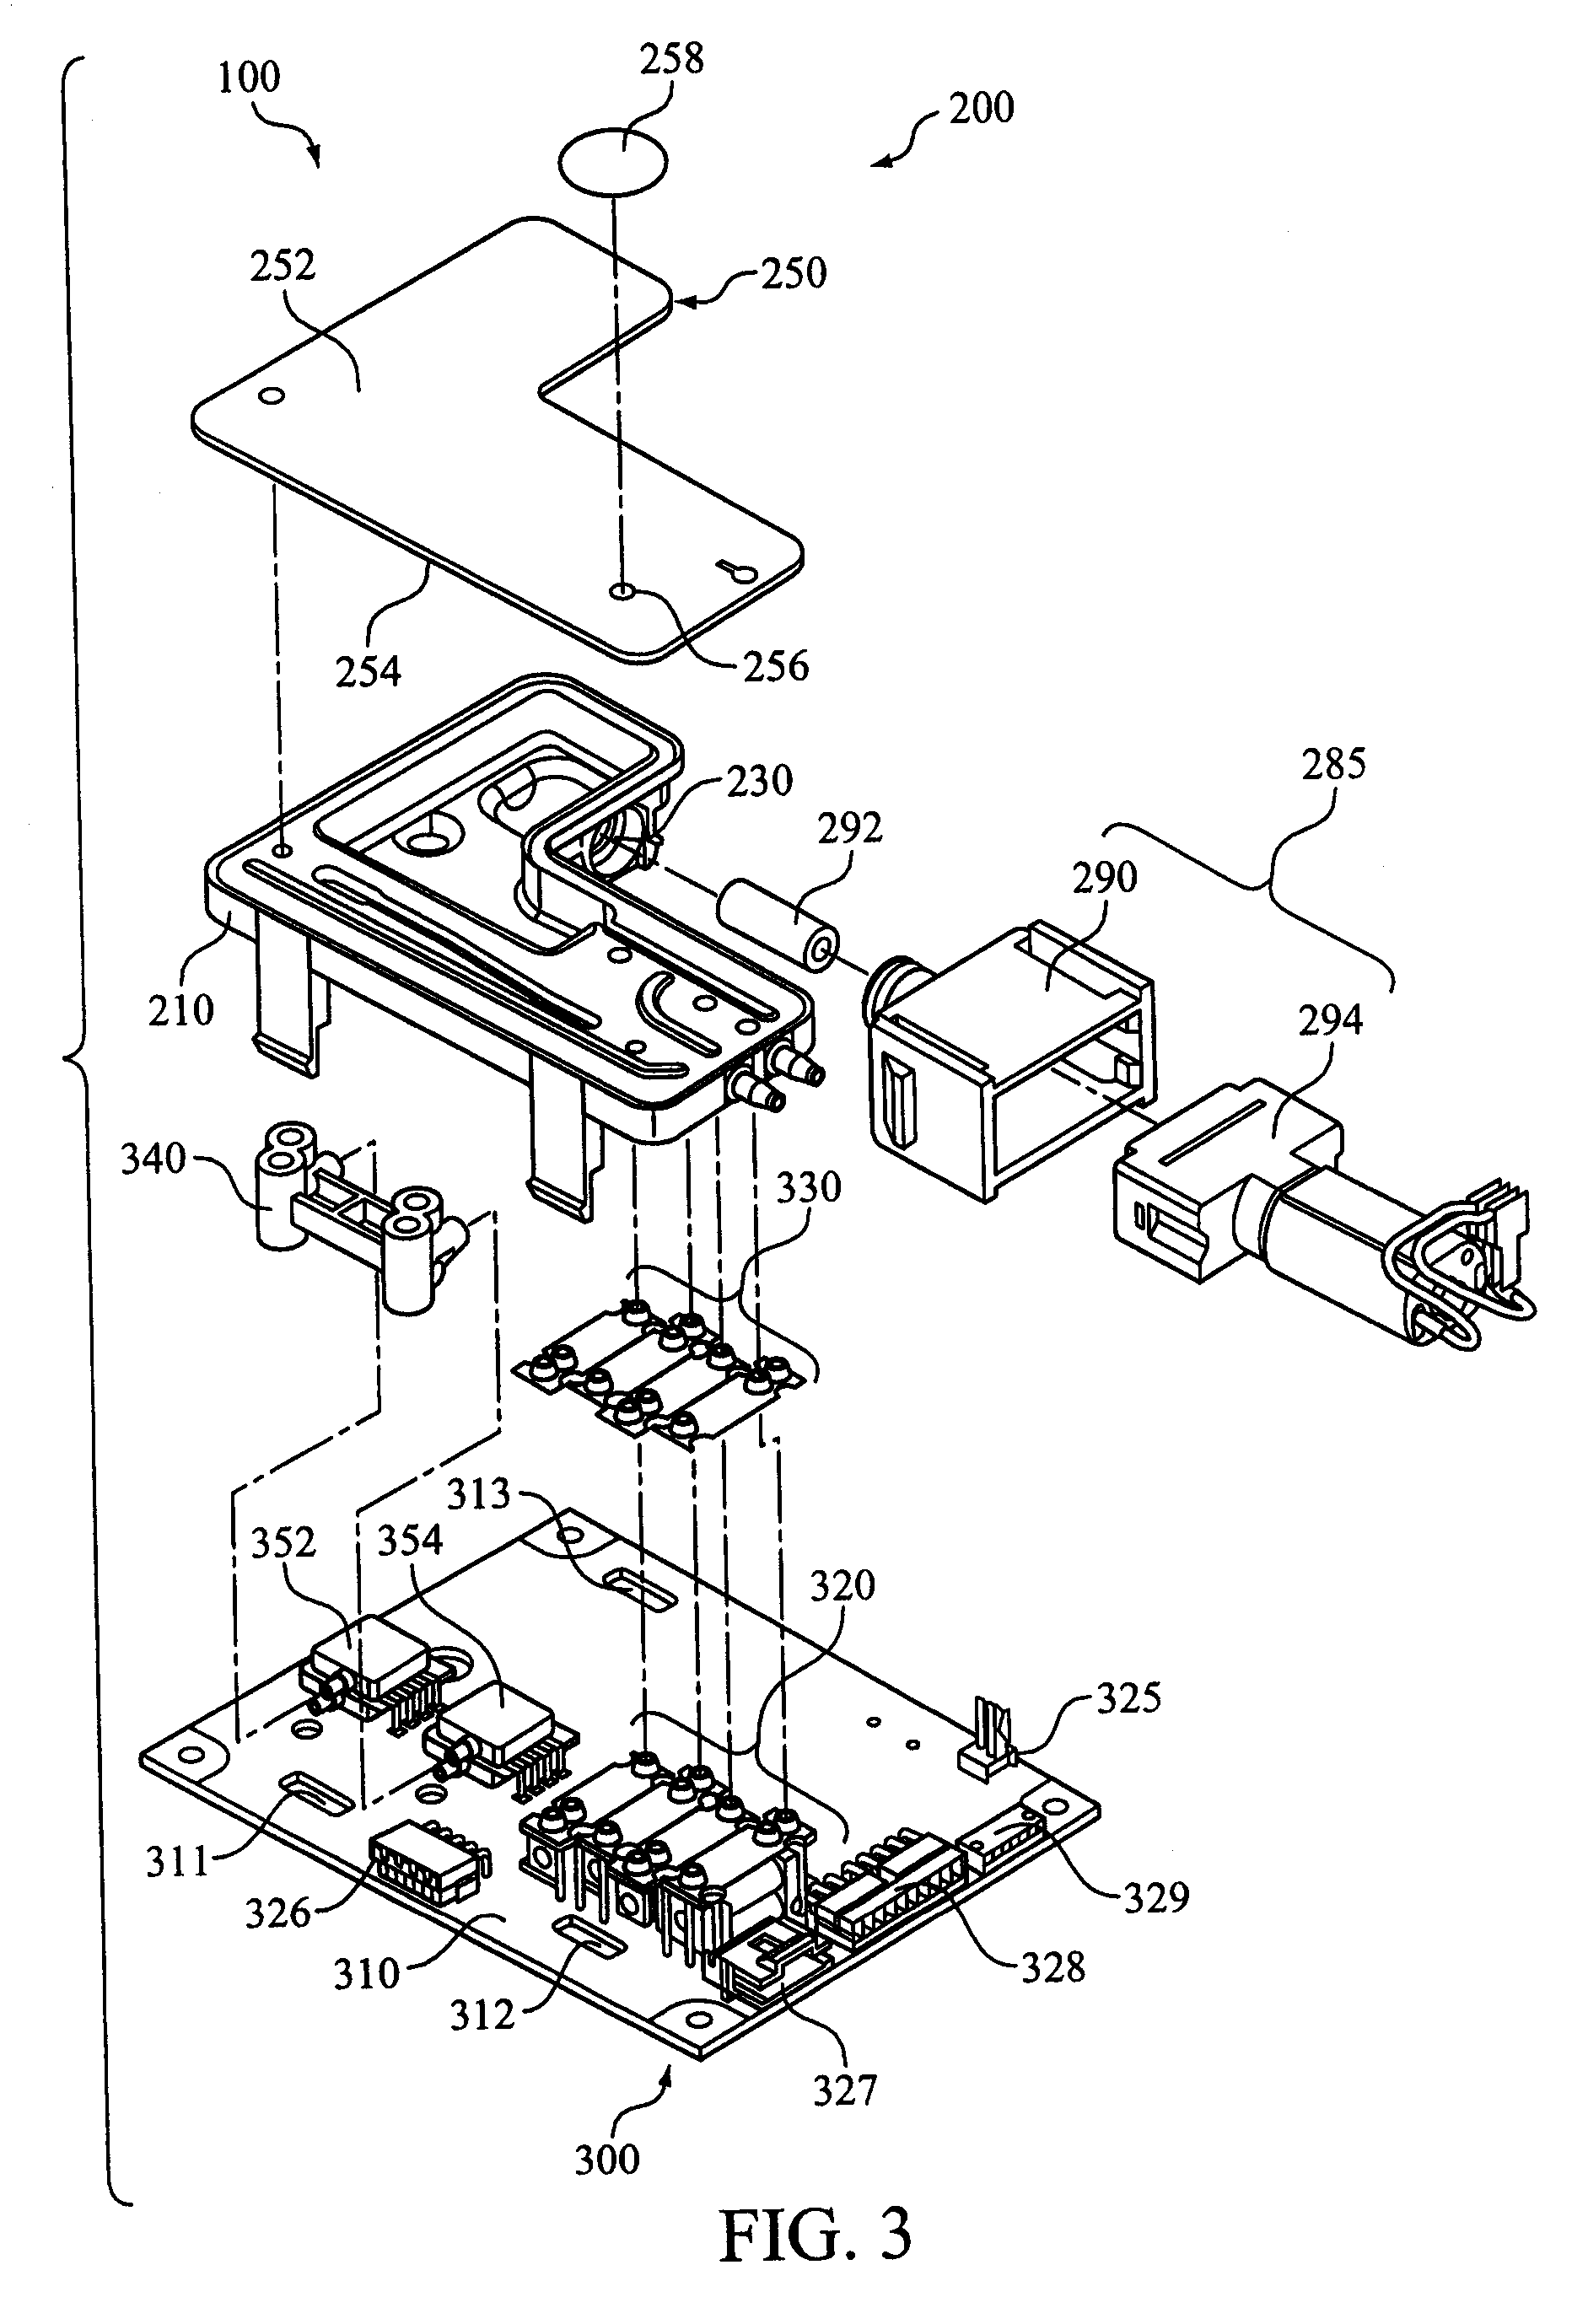 Electro-Pneumatic Assembly for Use in a Respiratory Measurement System